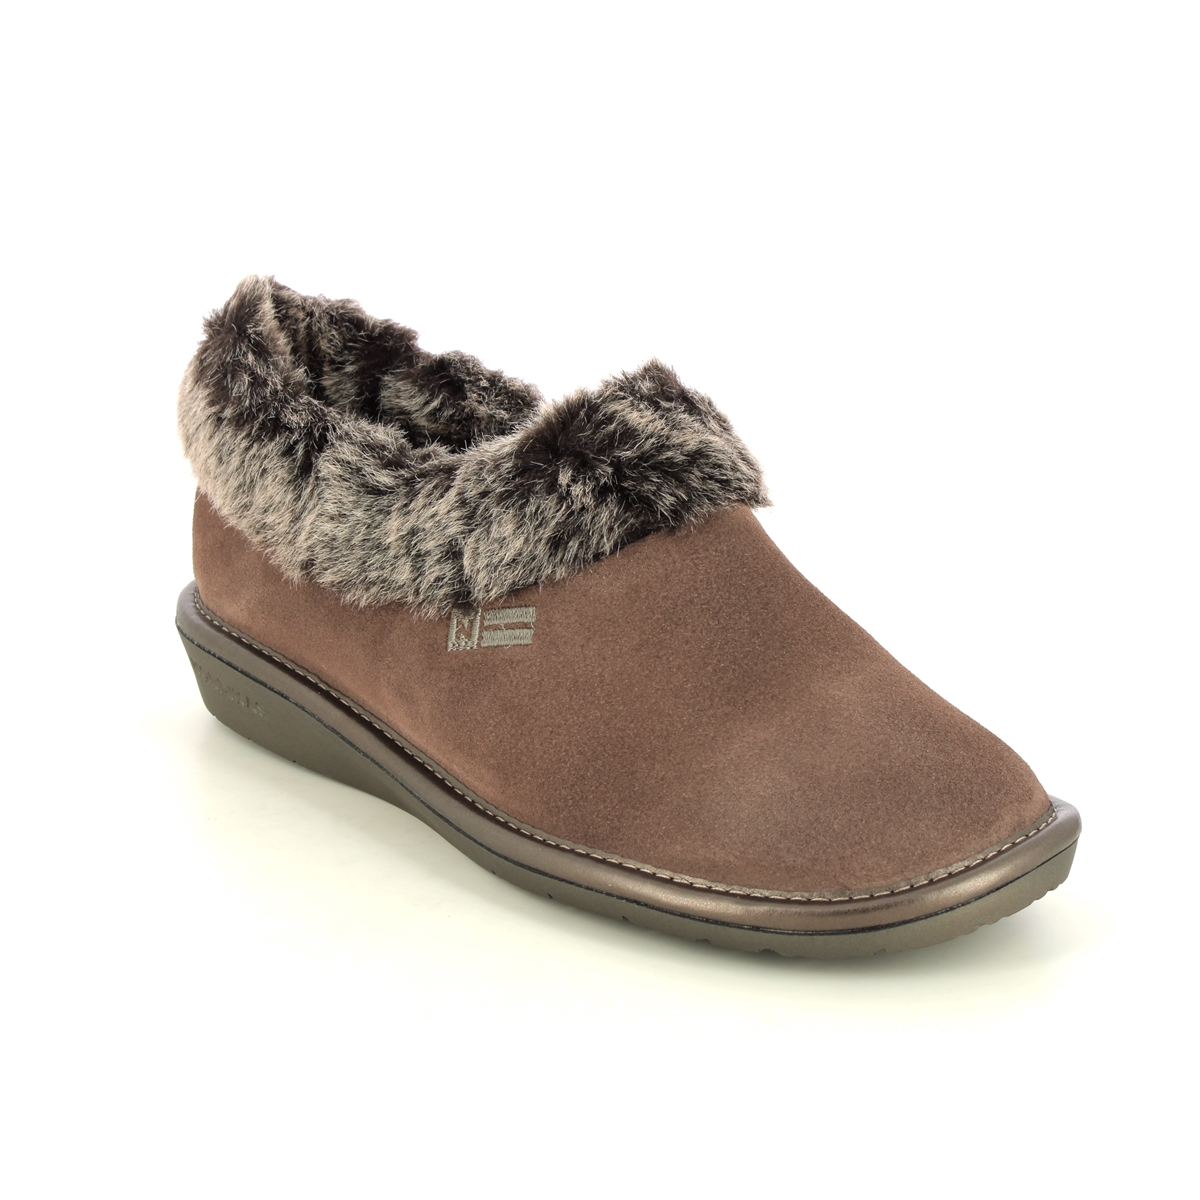 Nordikas Toasty Fur Taupe Suede Womens Slippers 1358-53 In Size 37 In Plain Taupe Suede